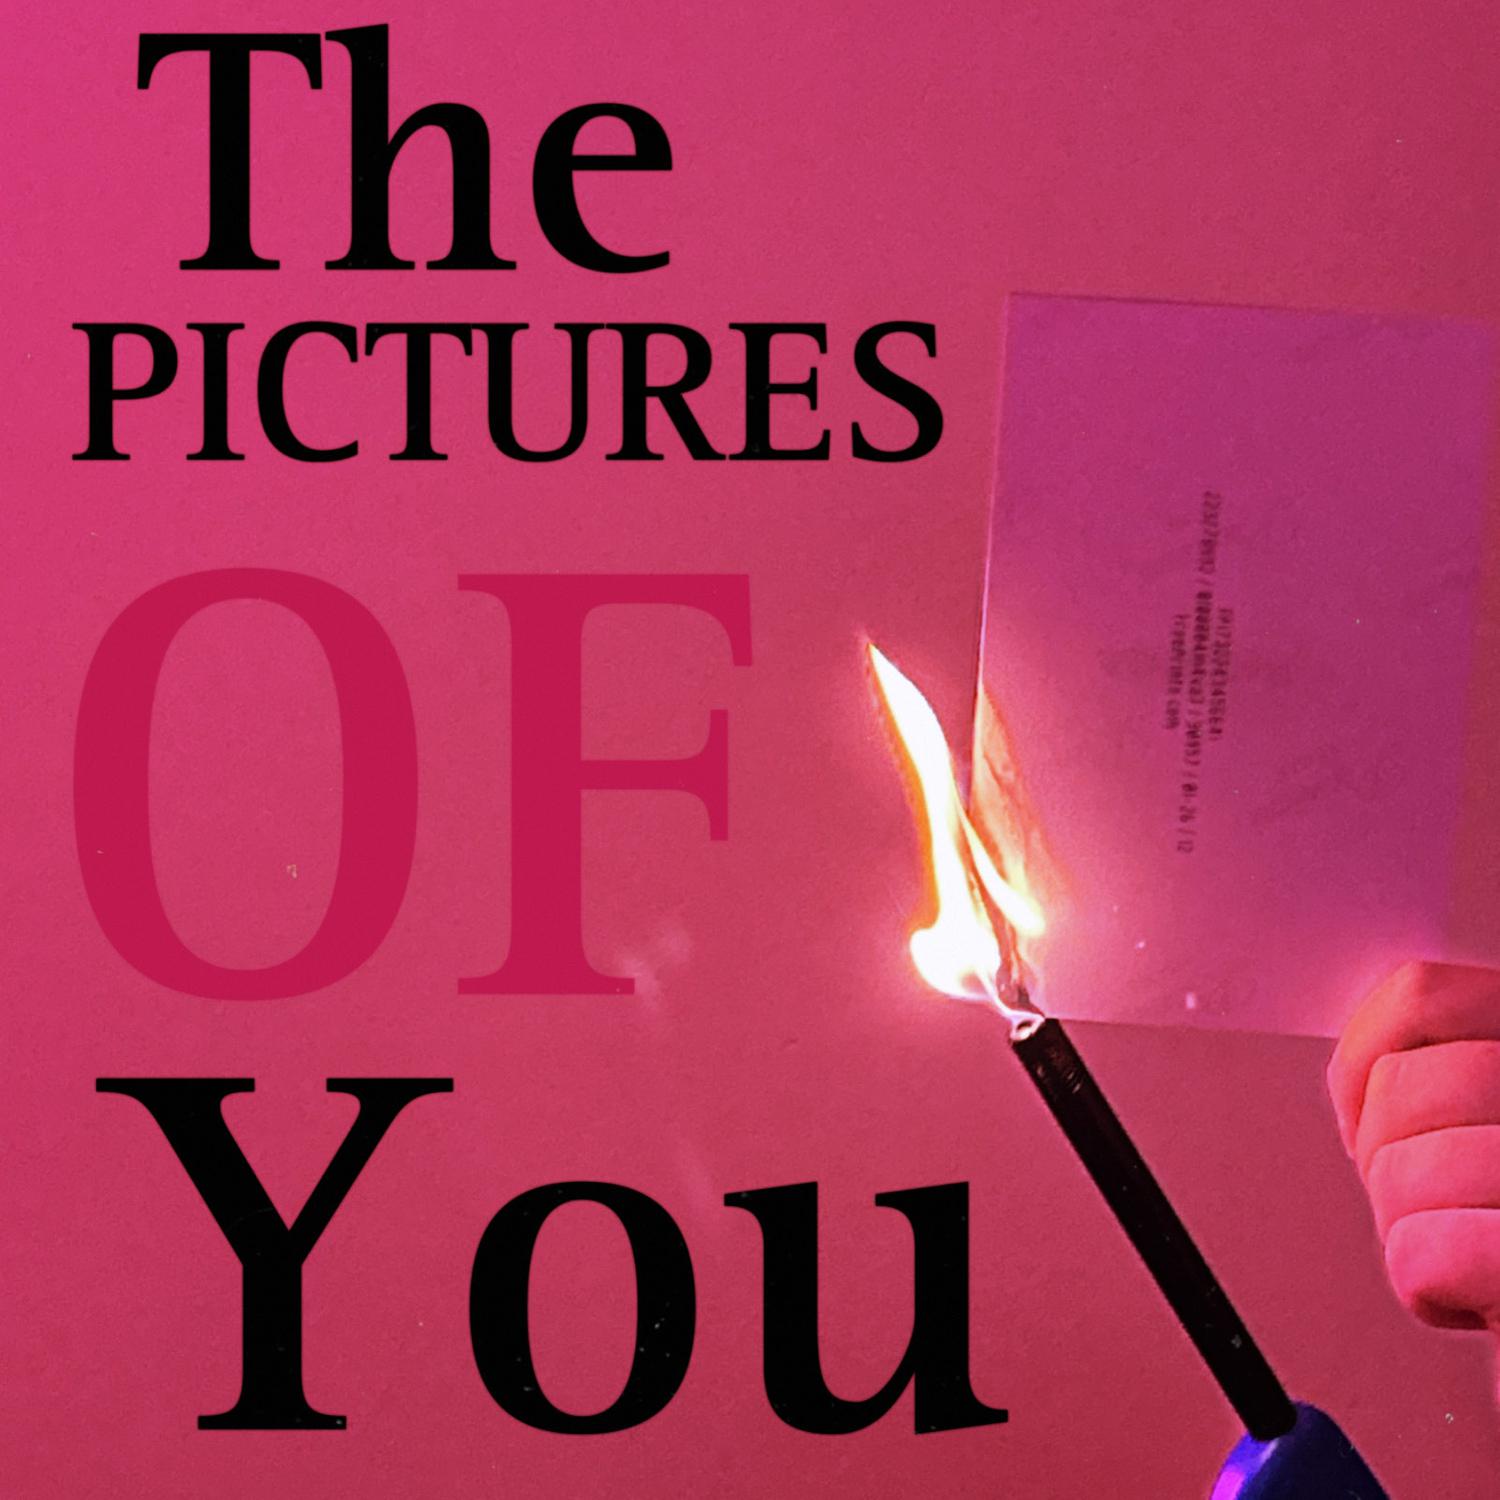 quinnie - The Pictures of You